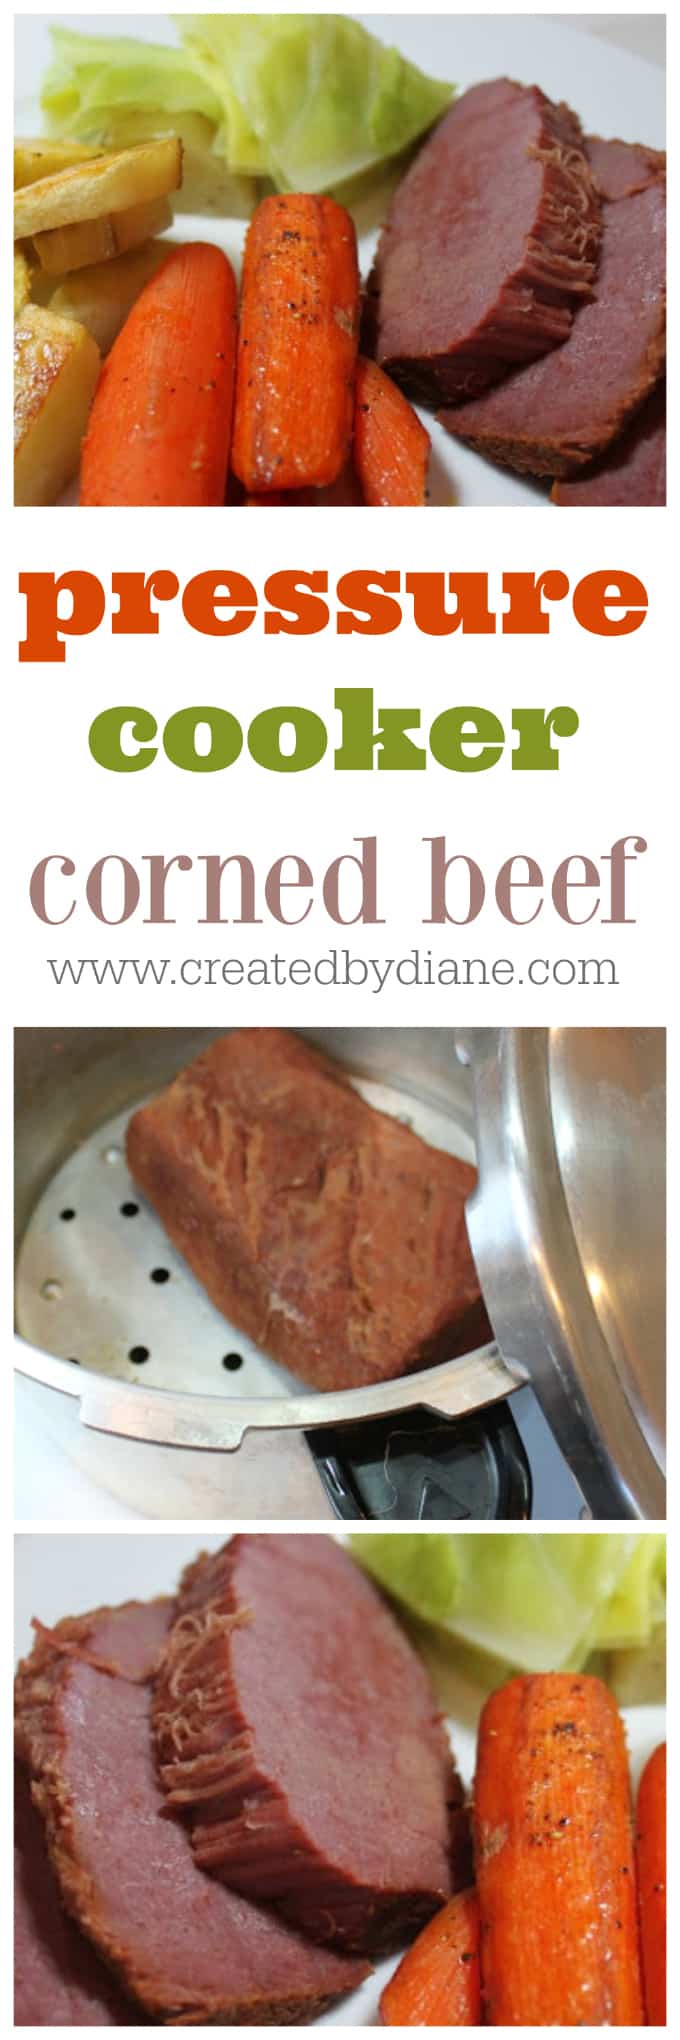 corned beef cooked in a pressure cooker